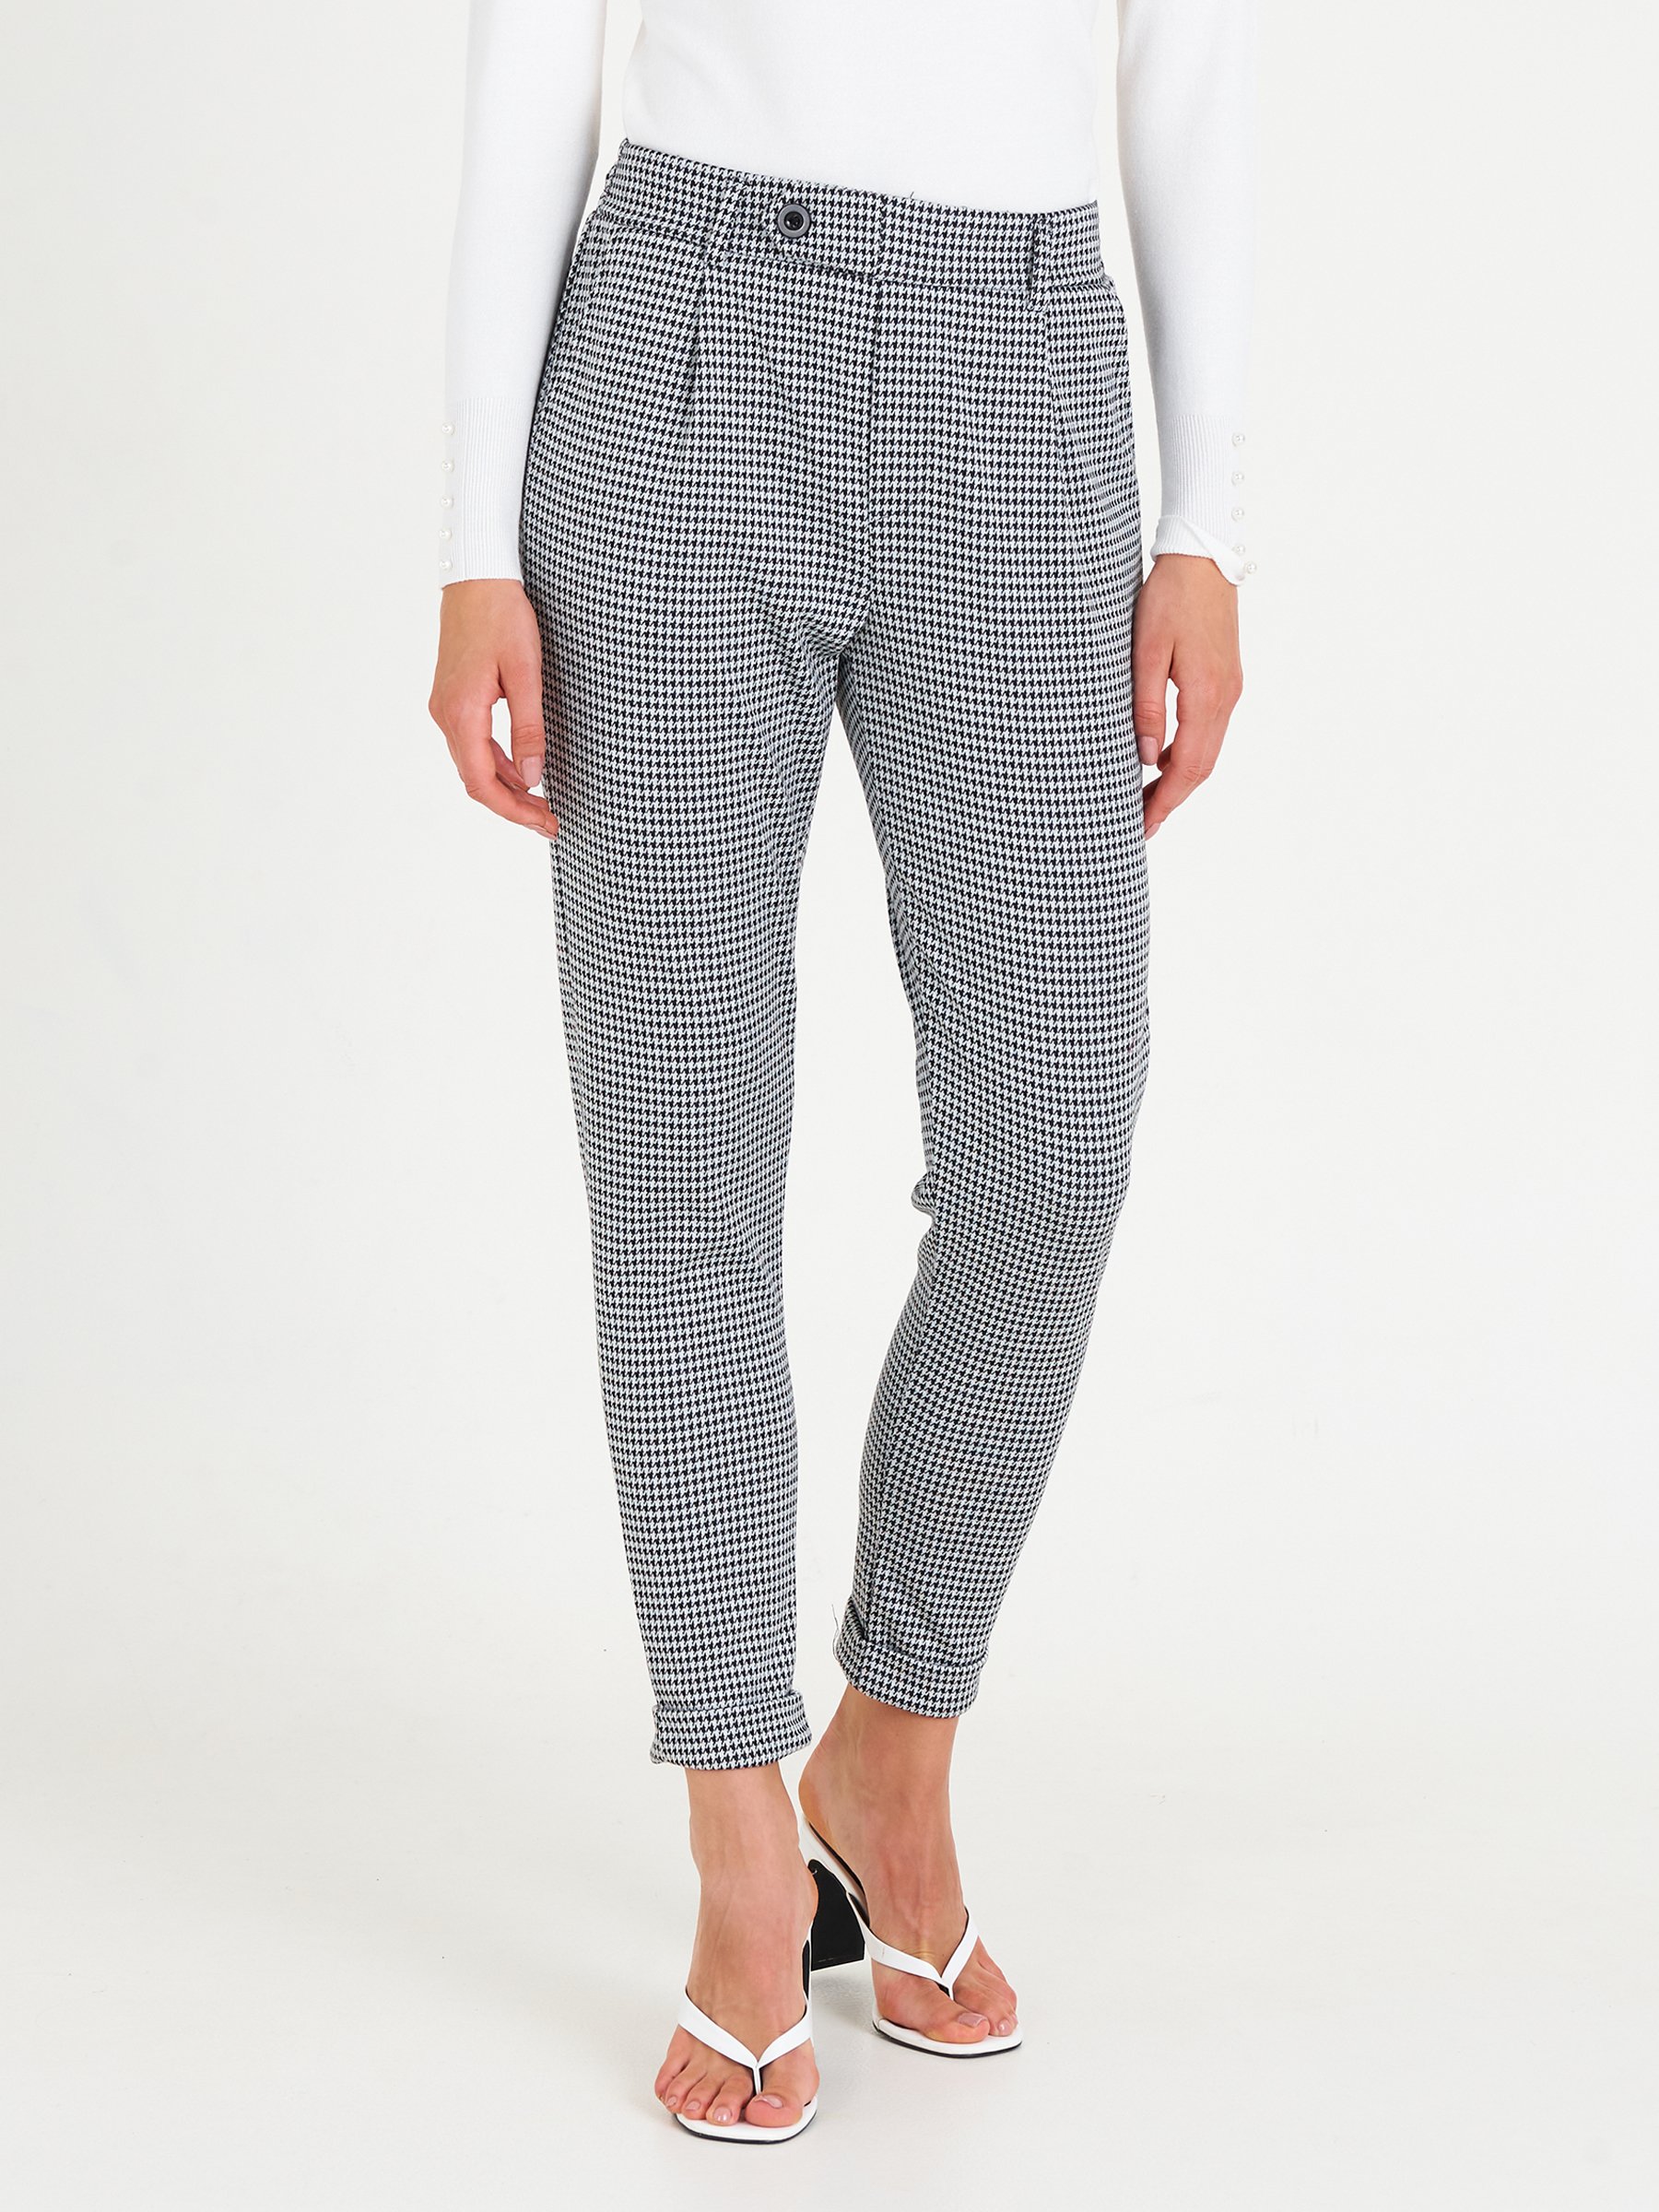 Six Ways to Wear Houndstooth Pants  Graceful Rags